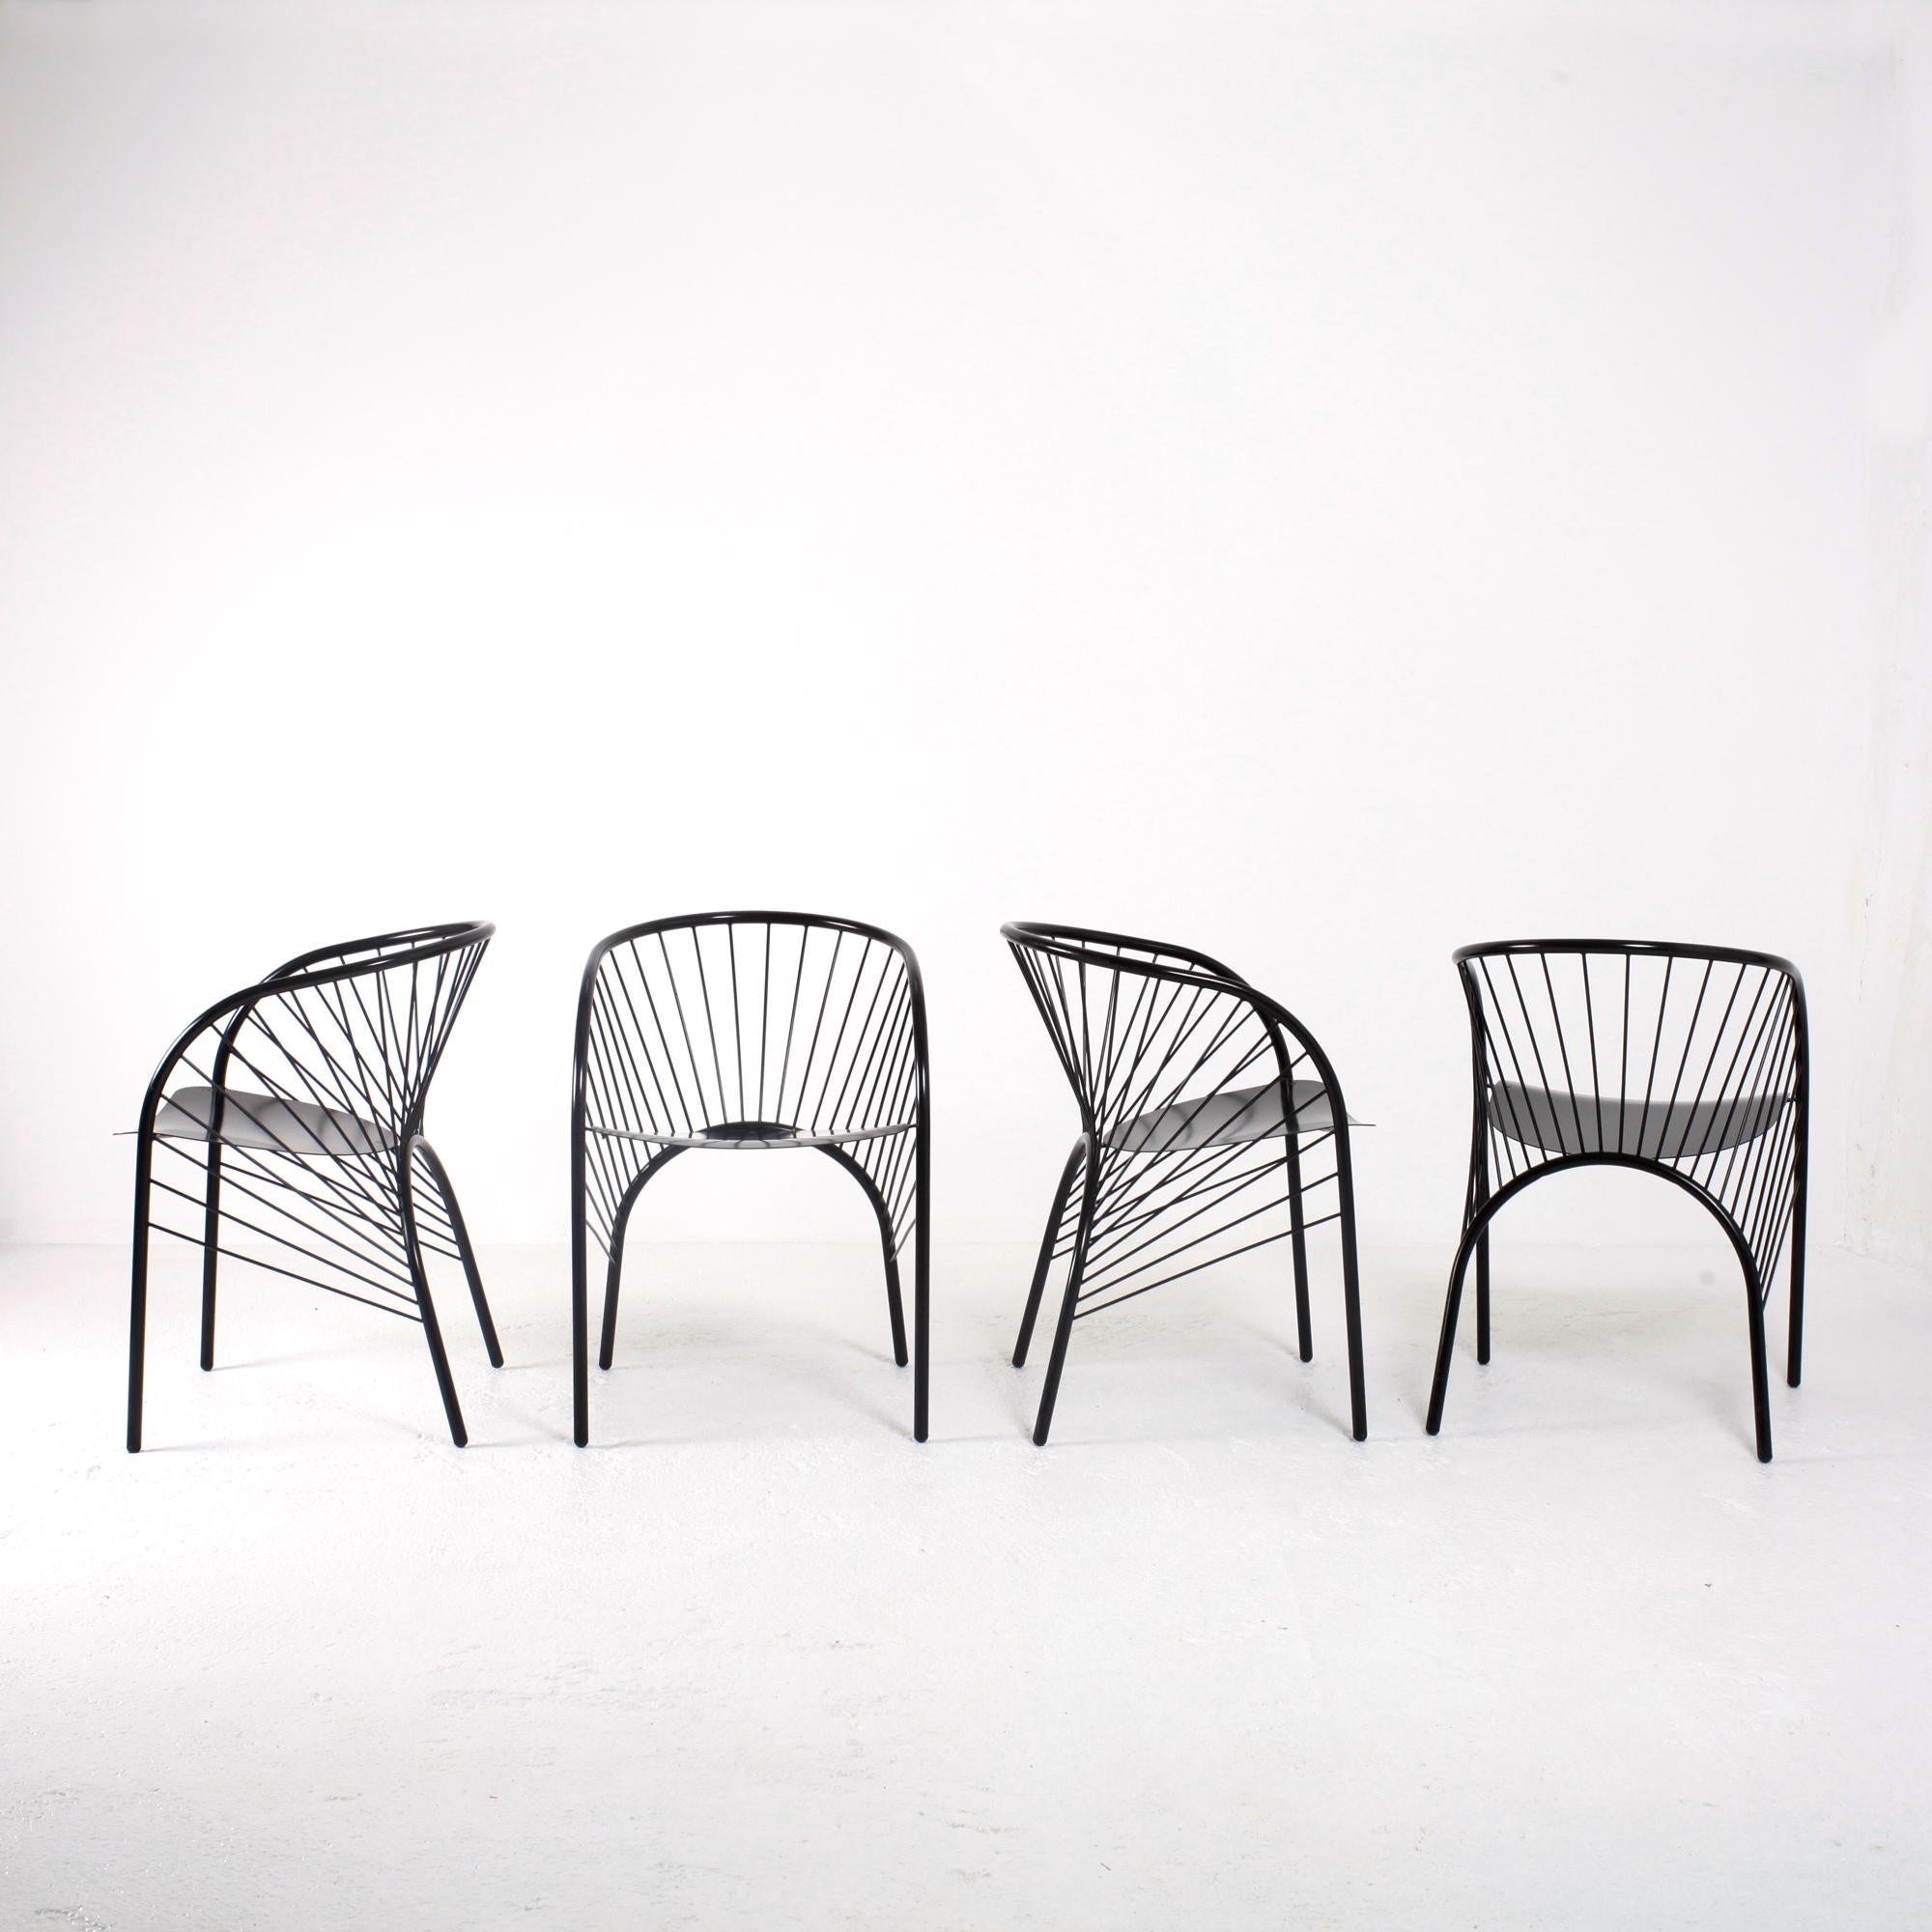 Set of Four Lizie Dining Chairs for Paolo Pallucco by Regis Protiere, Italy, 1984
Designed for the Centre Pompidou Museum of Modern and Contemporary Art library and edited by Pallucco
These chairs made of black lacquered metal are a great example of